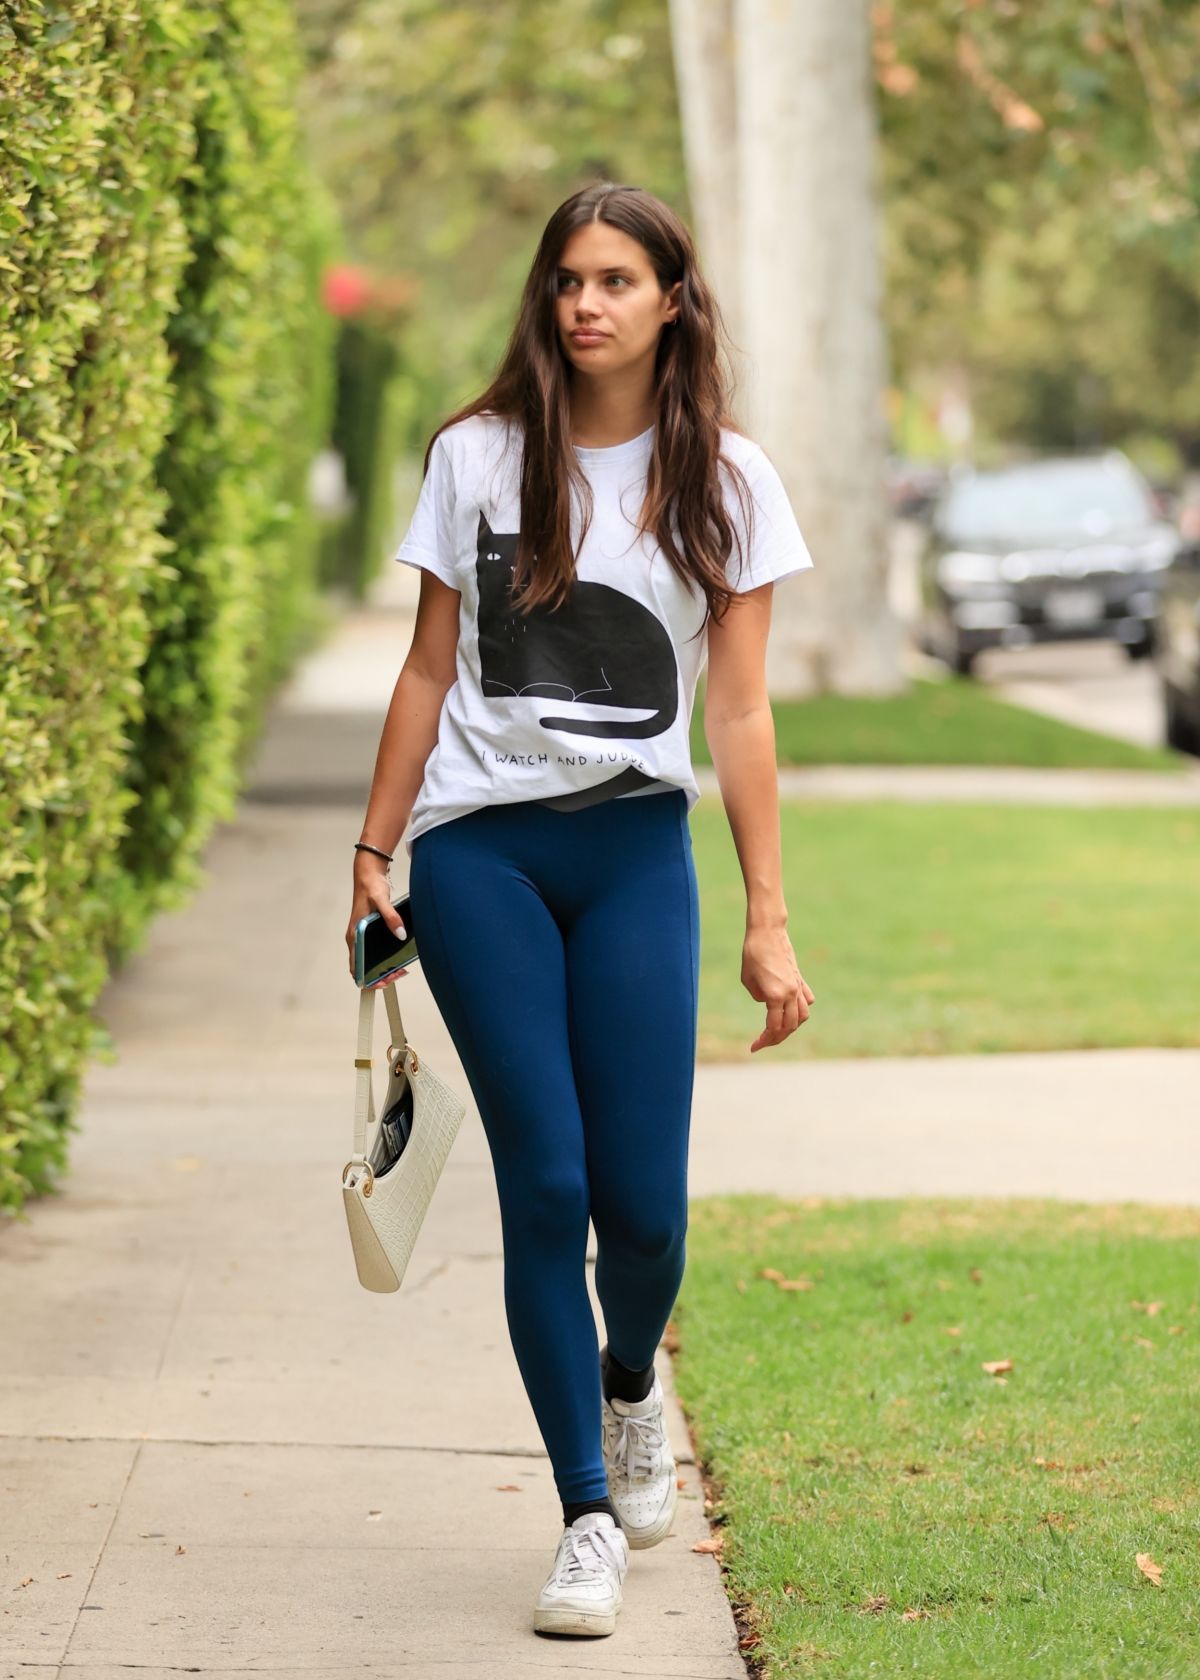 SARA SAMPAIO Arrives at Pilates Class in West Hollywood 07/13/2021